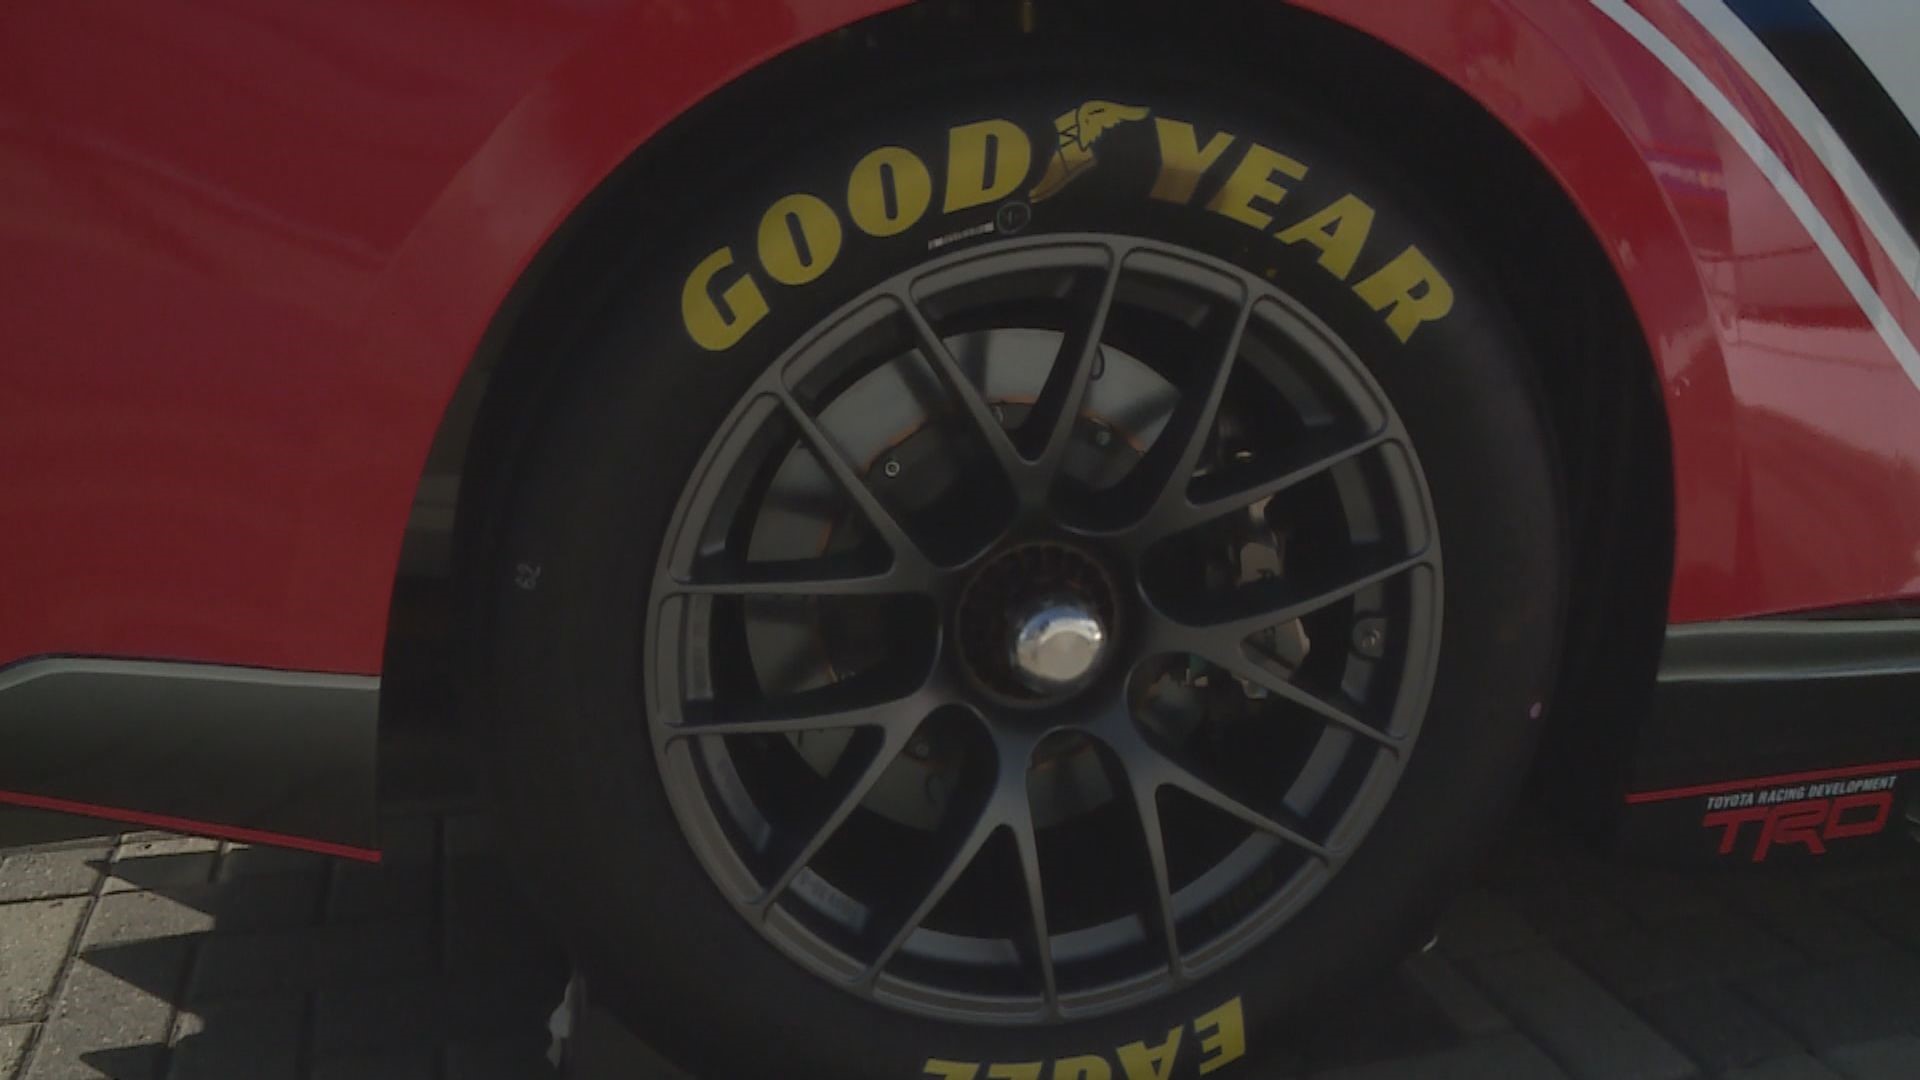 Looking to expand to an 18-inch wheel, NASCAR felt that a lone, center-locking lug nut was its best option for durability and safety.